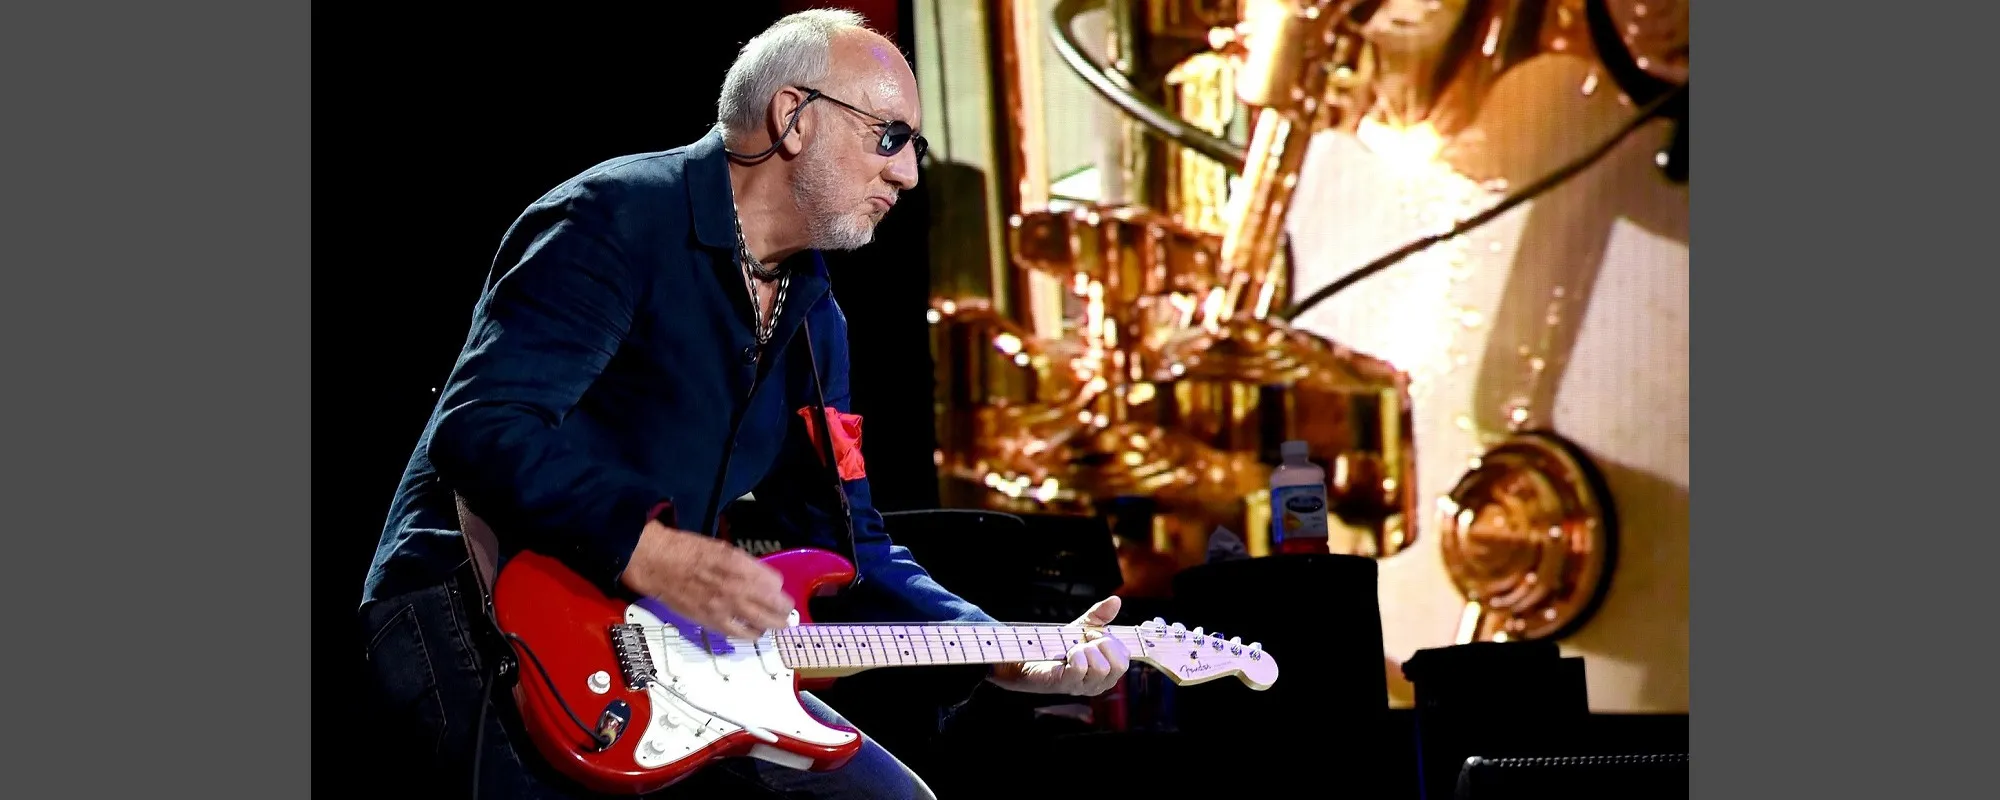 The Who’s Pete Townshend on Possible Final Tour, New Music, and Why an Avatar Show Might Be a Good Idea